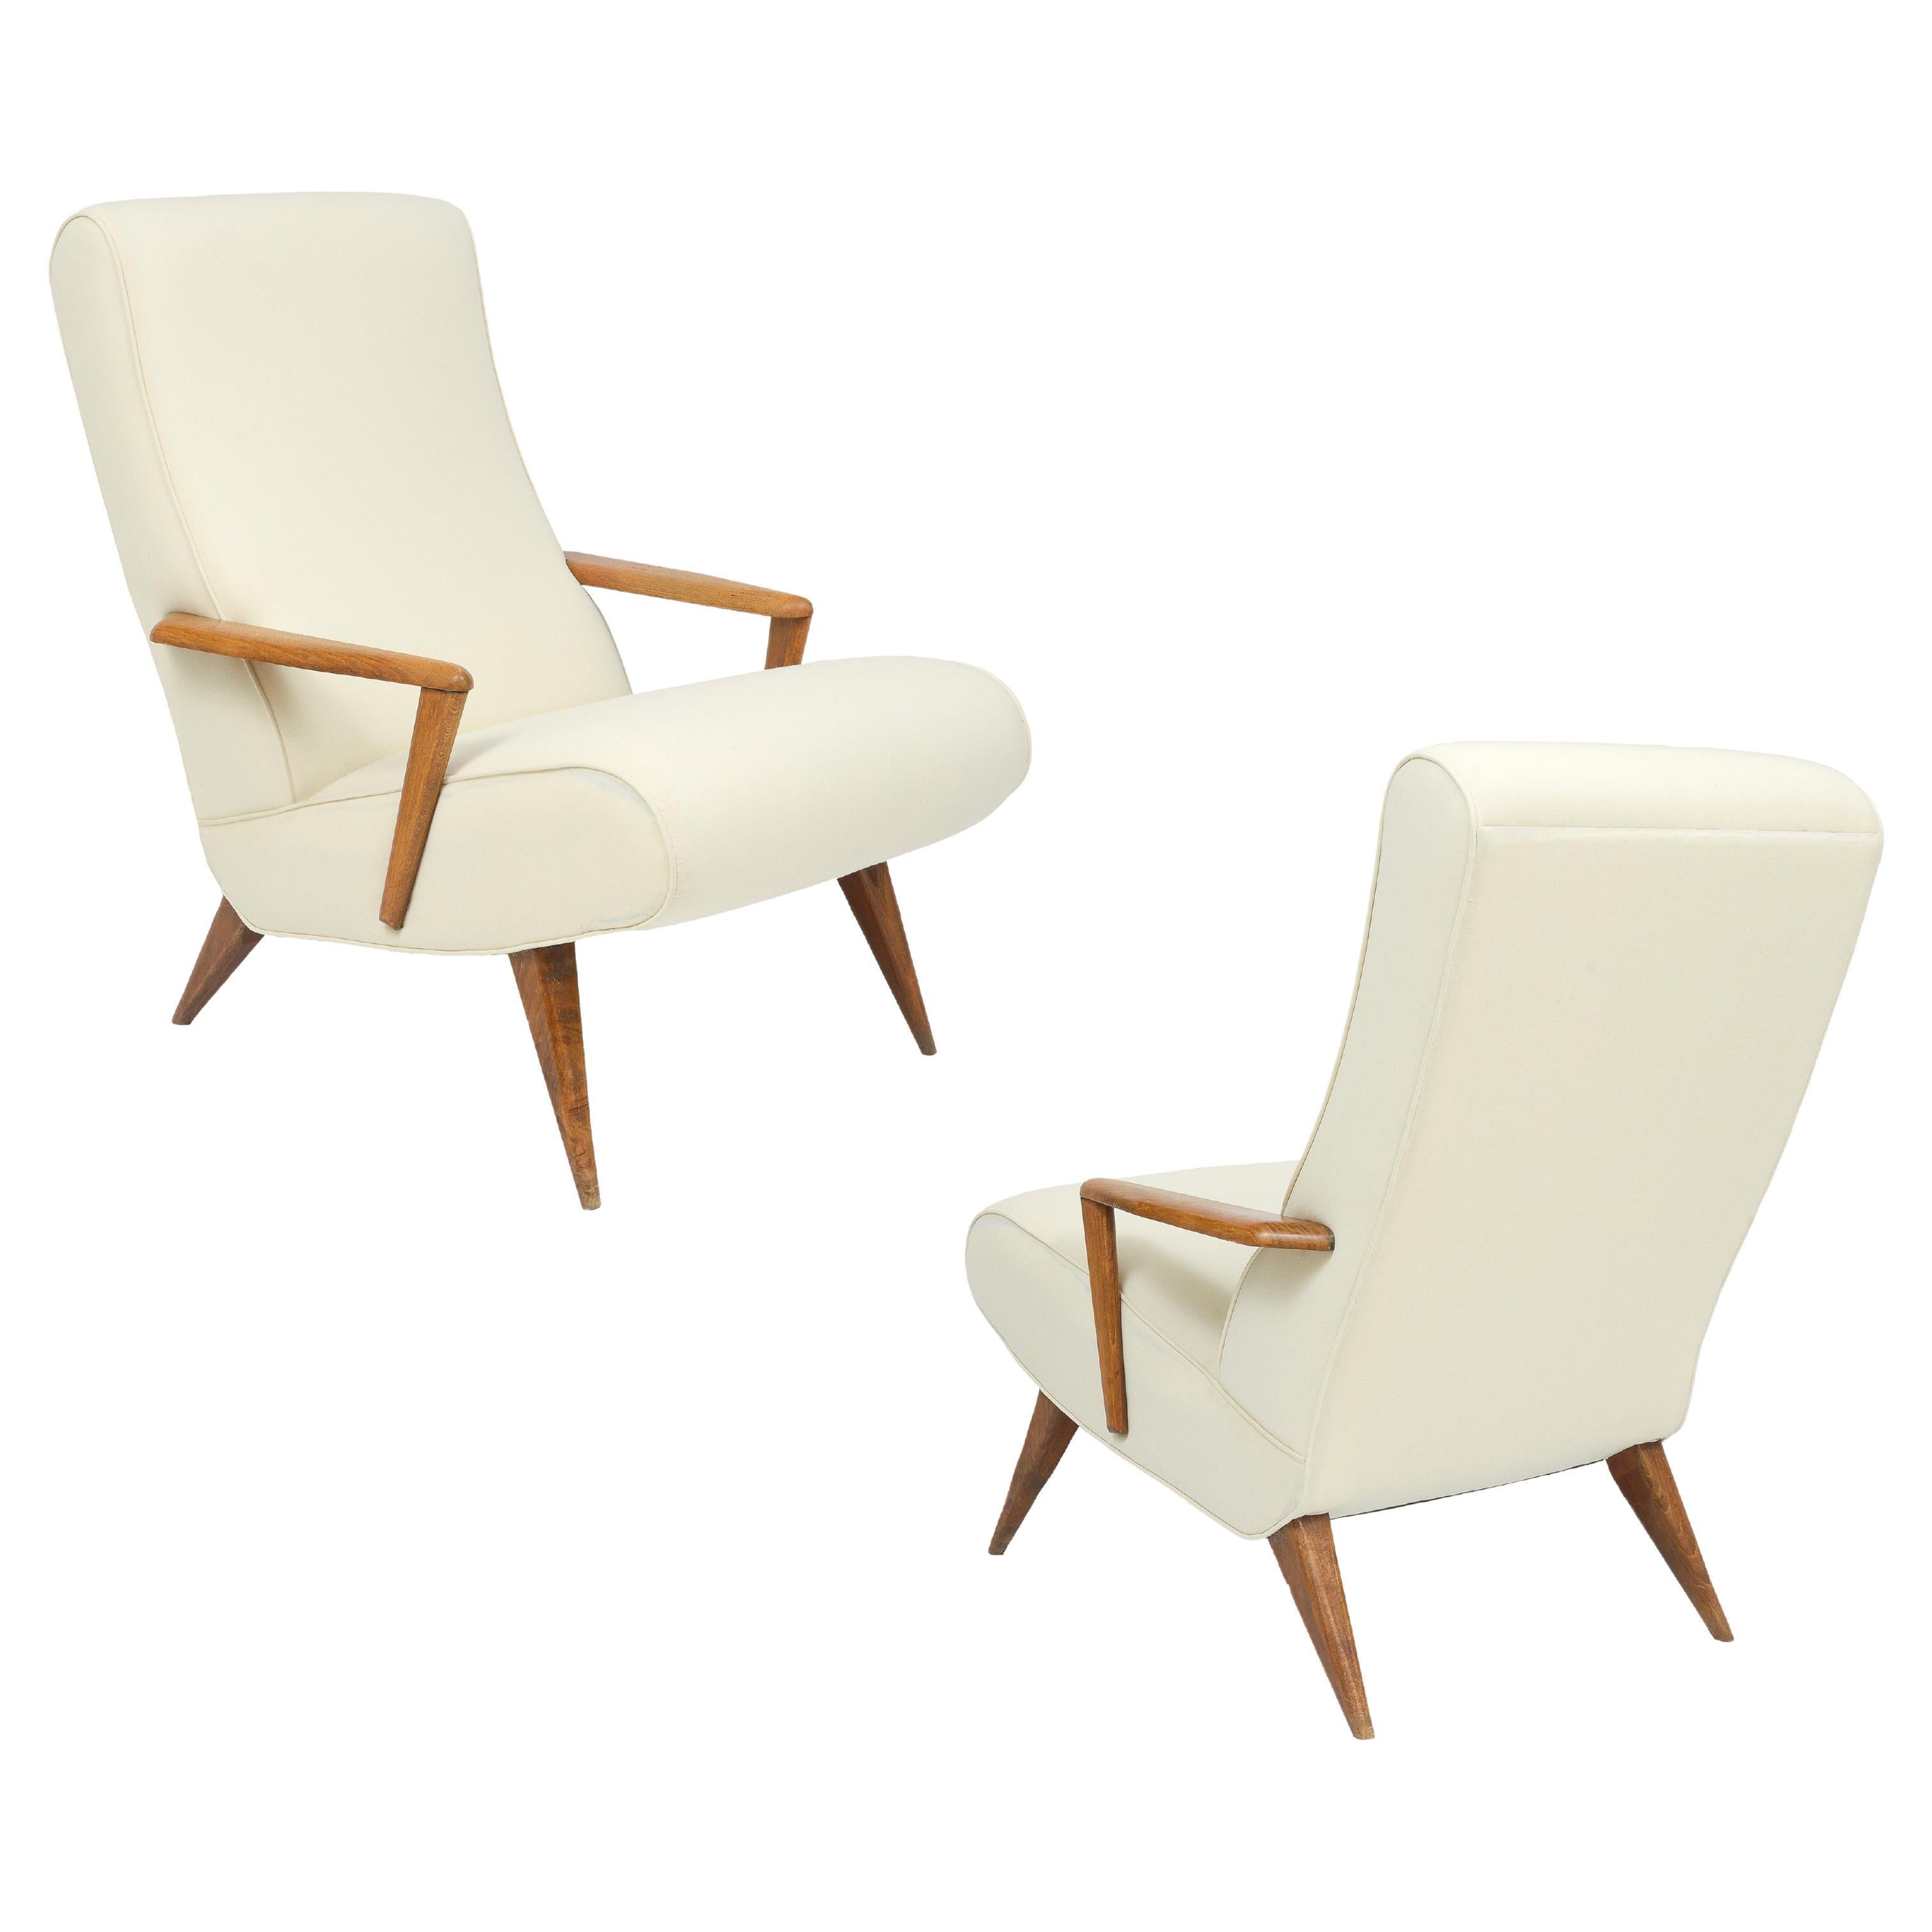 Sculptural Pair Italian White Wood Elegant Lounge Chairs, 1960's, Italy For Sale